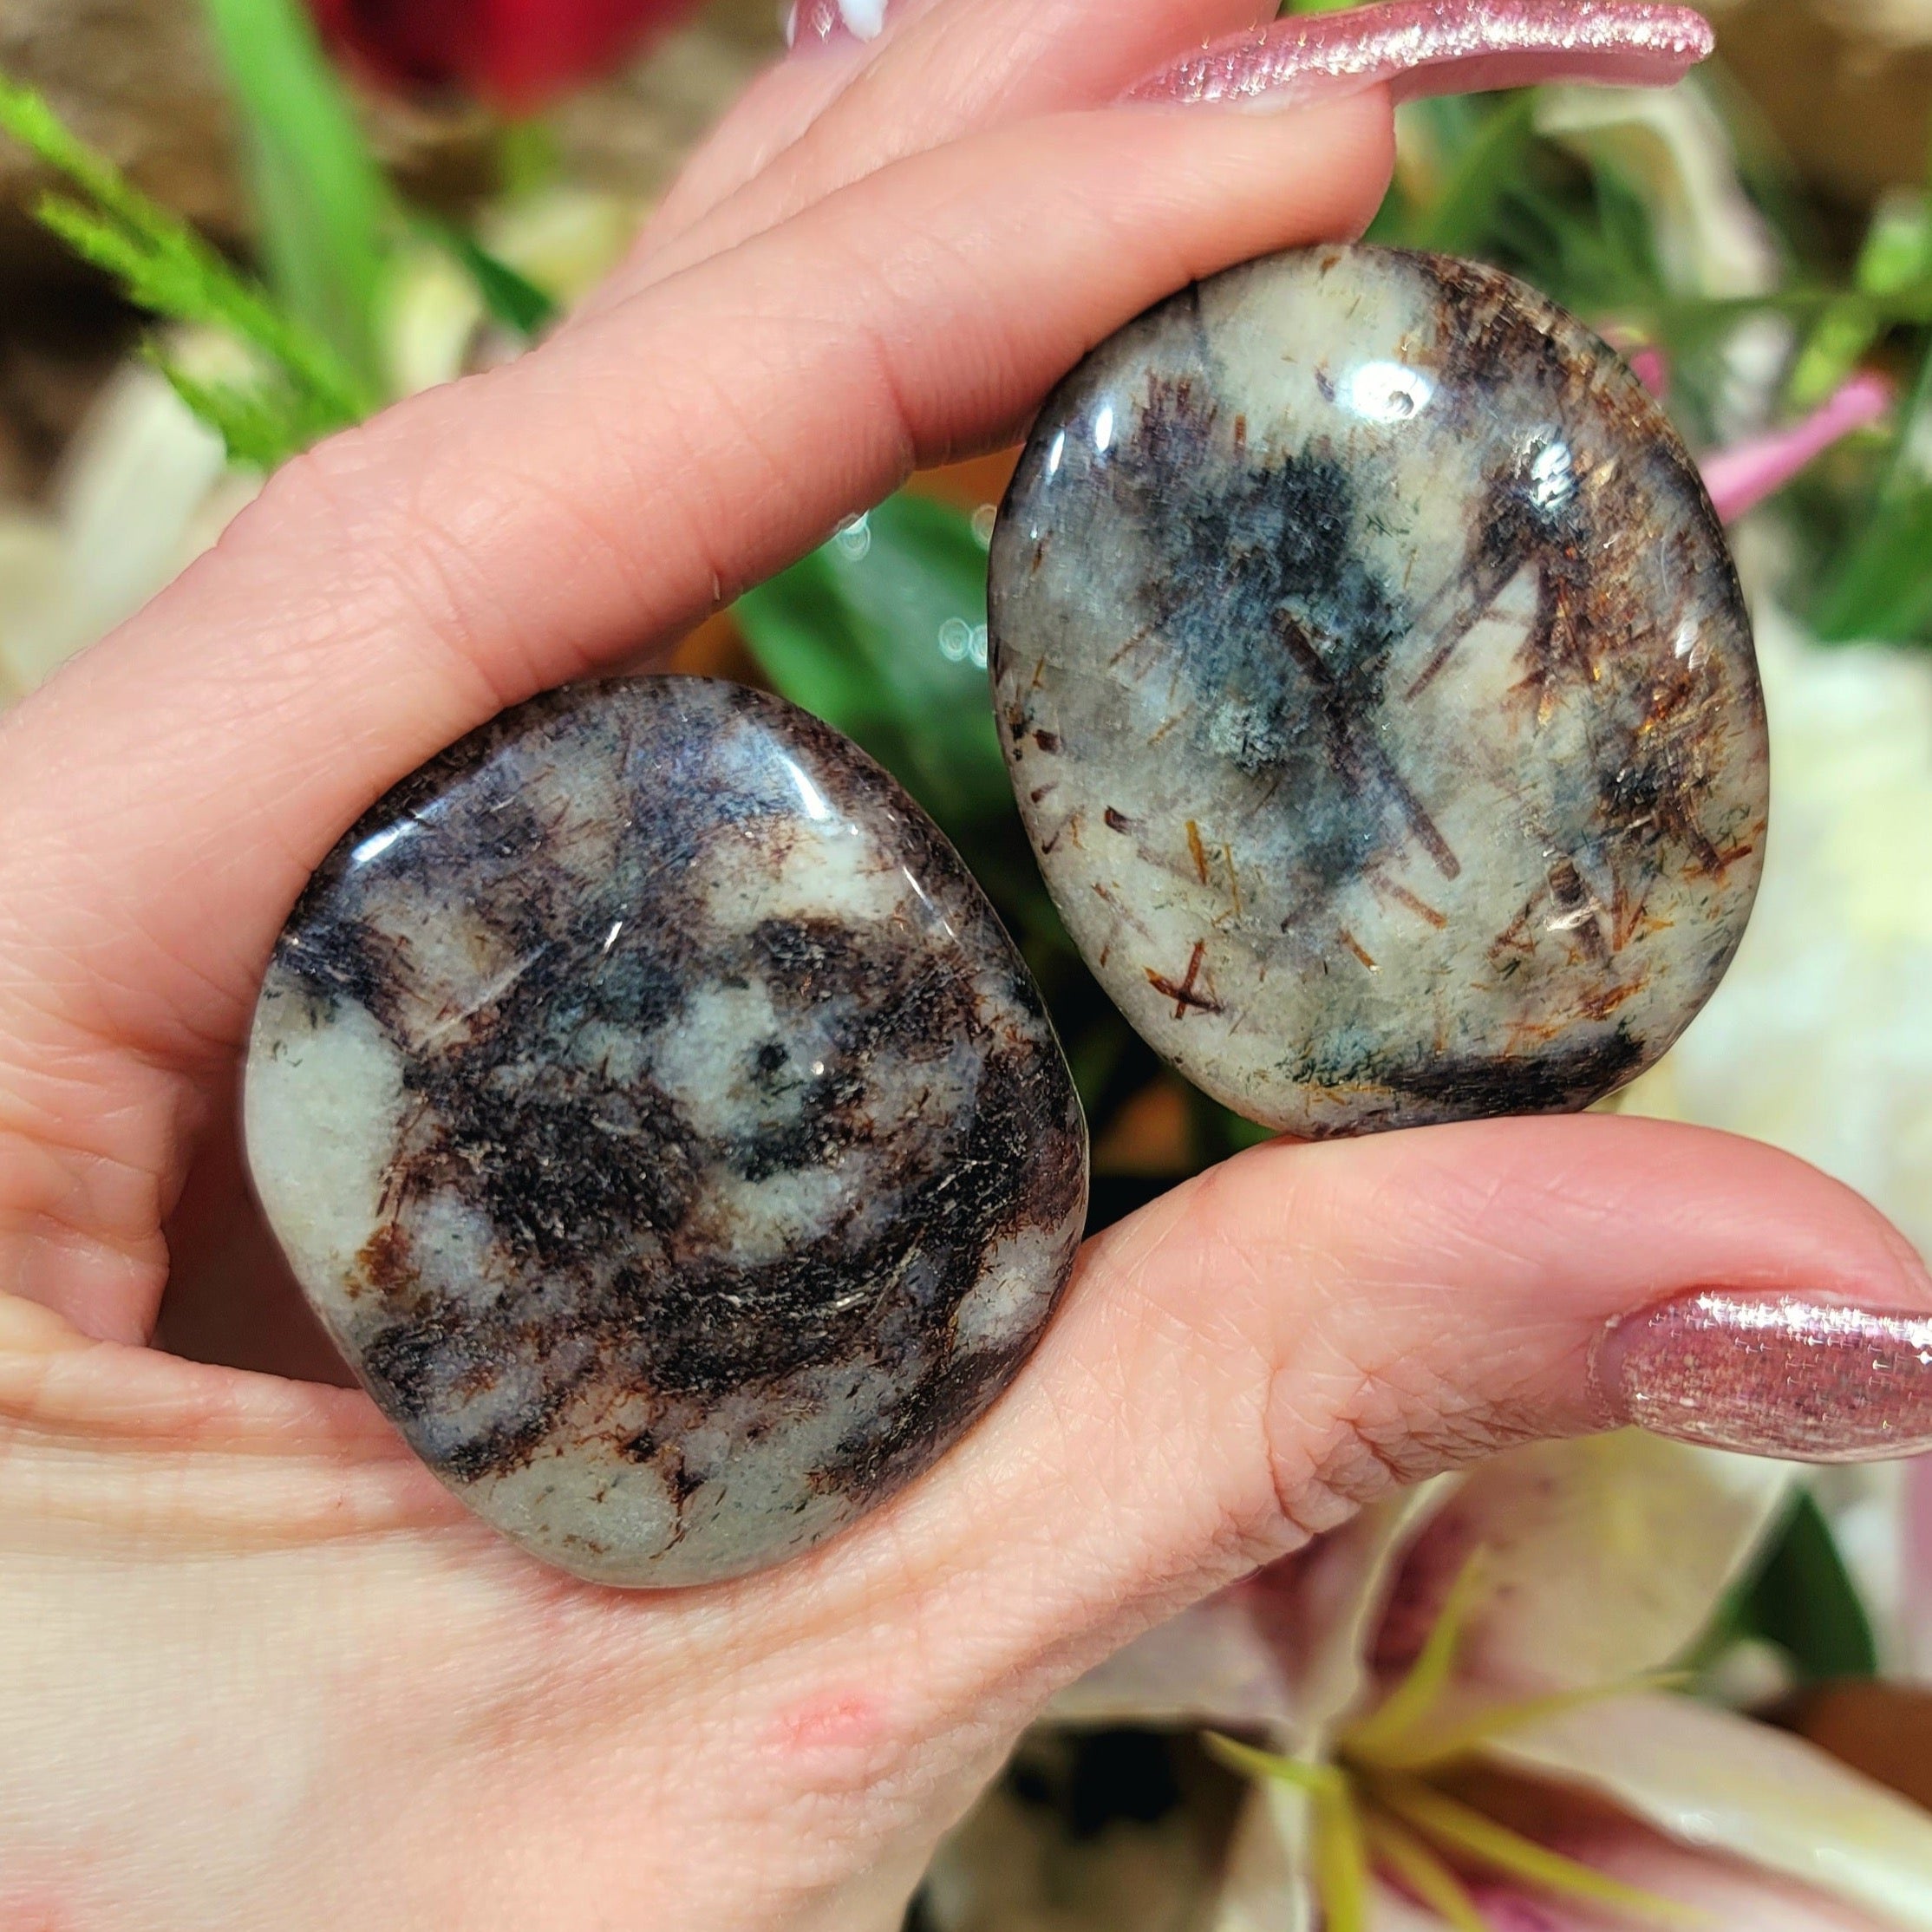 Astrophyllite Mini Palm for Embracing Your Authentic Self and Overcoming Fears